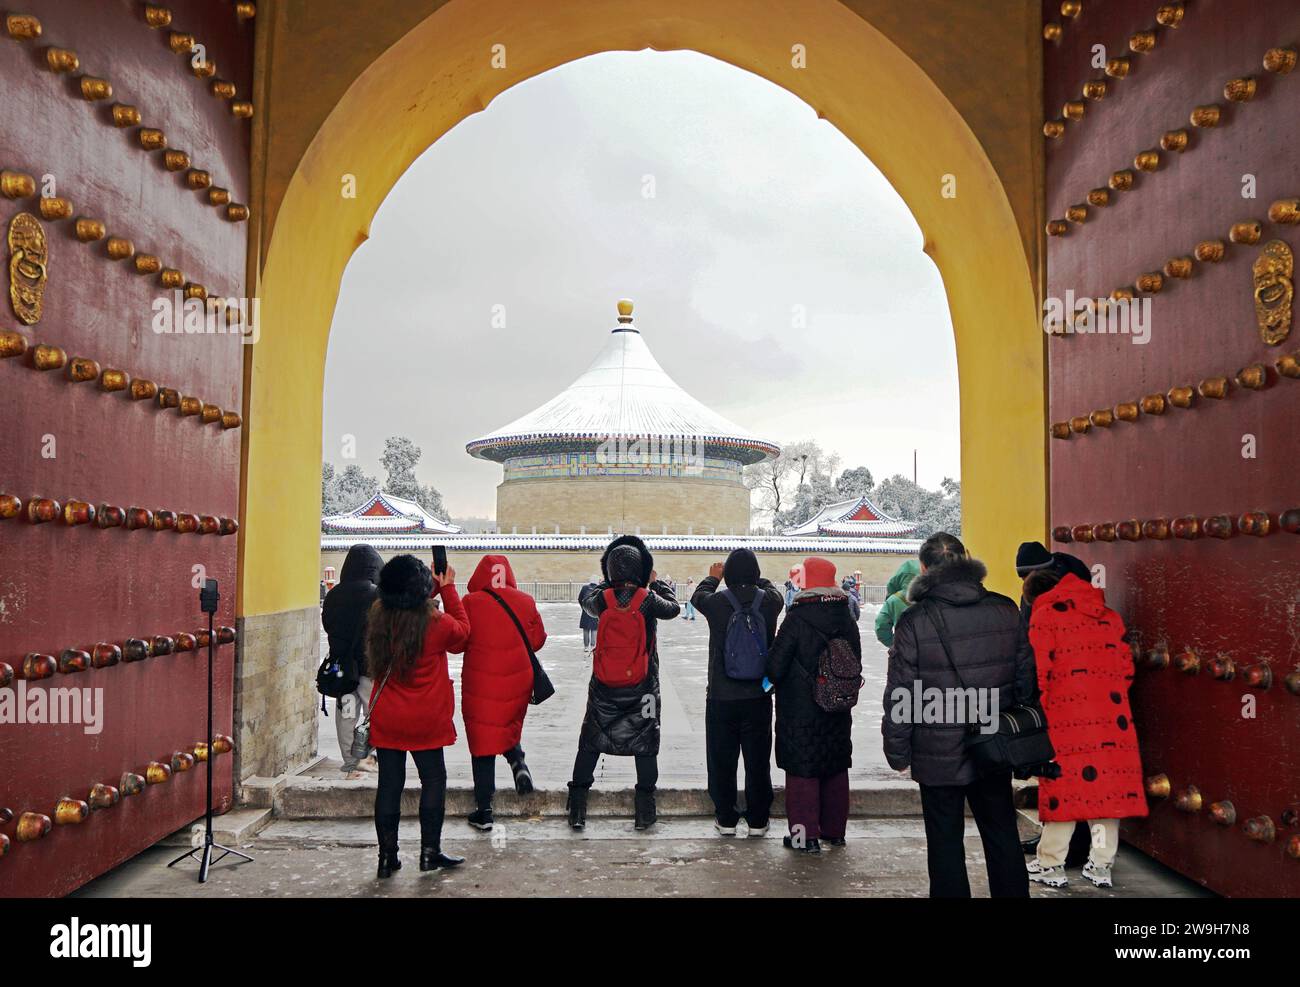 (231228) -- BEIJING, Dec. 28, 2023 (Xinhua) -- Visitors take photos at the Temple of Heaven in Beijing, capital of China, Dec. 11, 2023. First created in the Yuan Dynasty (1271-1368), the Beijing Central Axis, or Zhongzhouxian, stretches 7.8 kilometers between the Yongding Gate in the south of the city and the Drum Tower and Bell Tower in the north. Most of the major old-city buildings of Beijing sit along this axis. Gates, palaces, temples, squares and gardens of the old city are all linked up to the axis. As they witnessed the folk activities along the line from old days to new ones, they Stock Photo